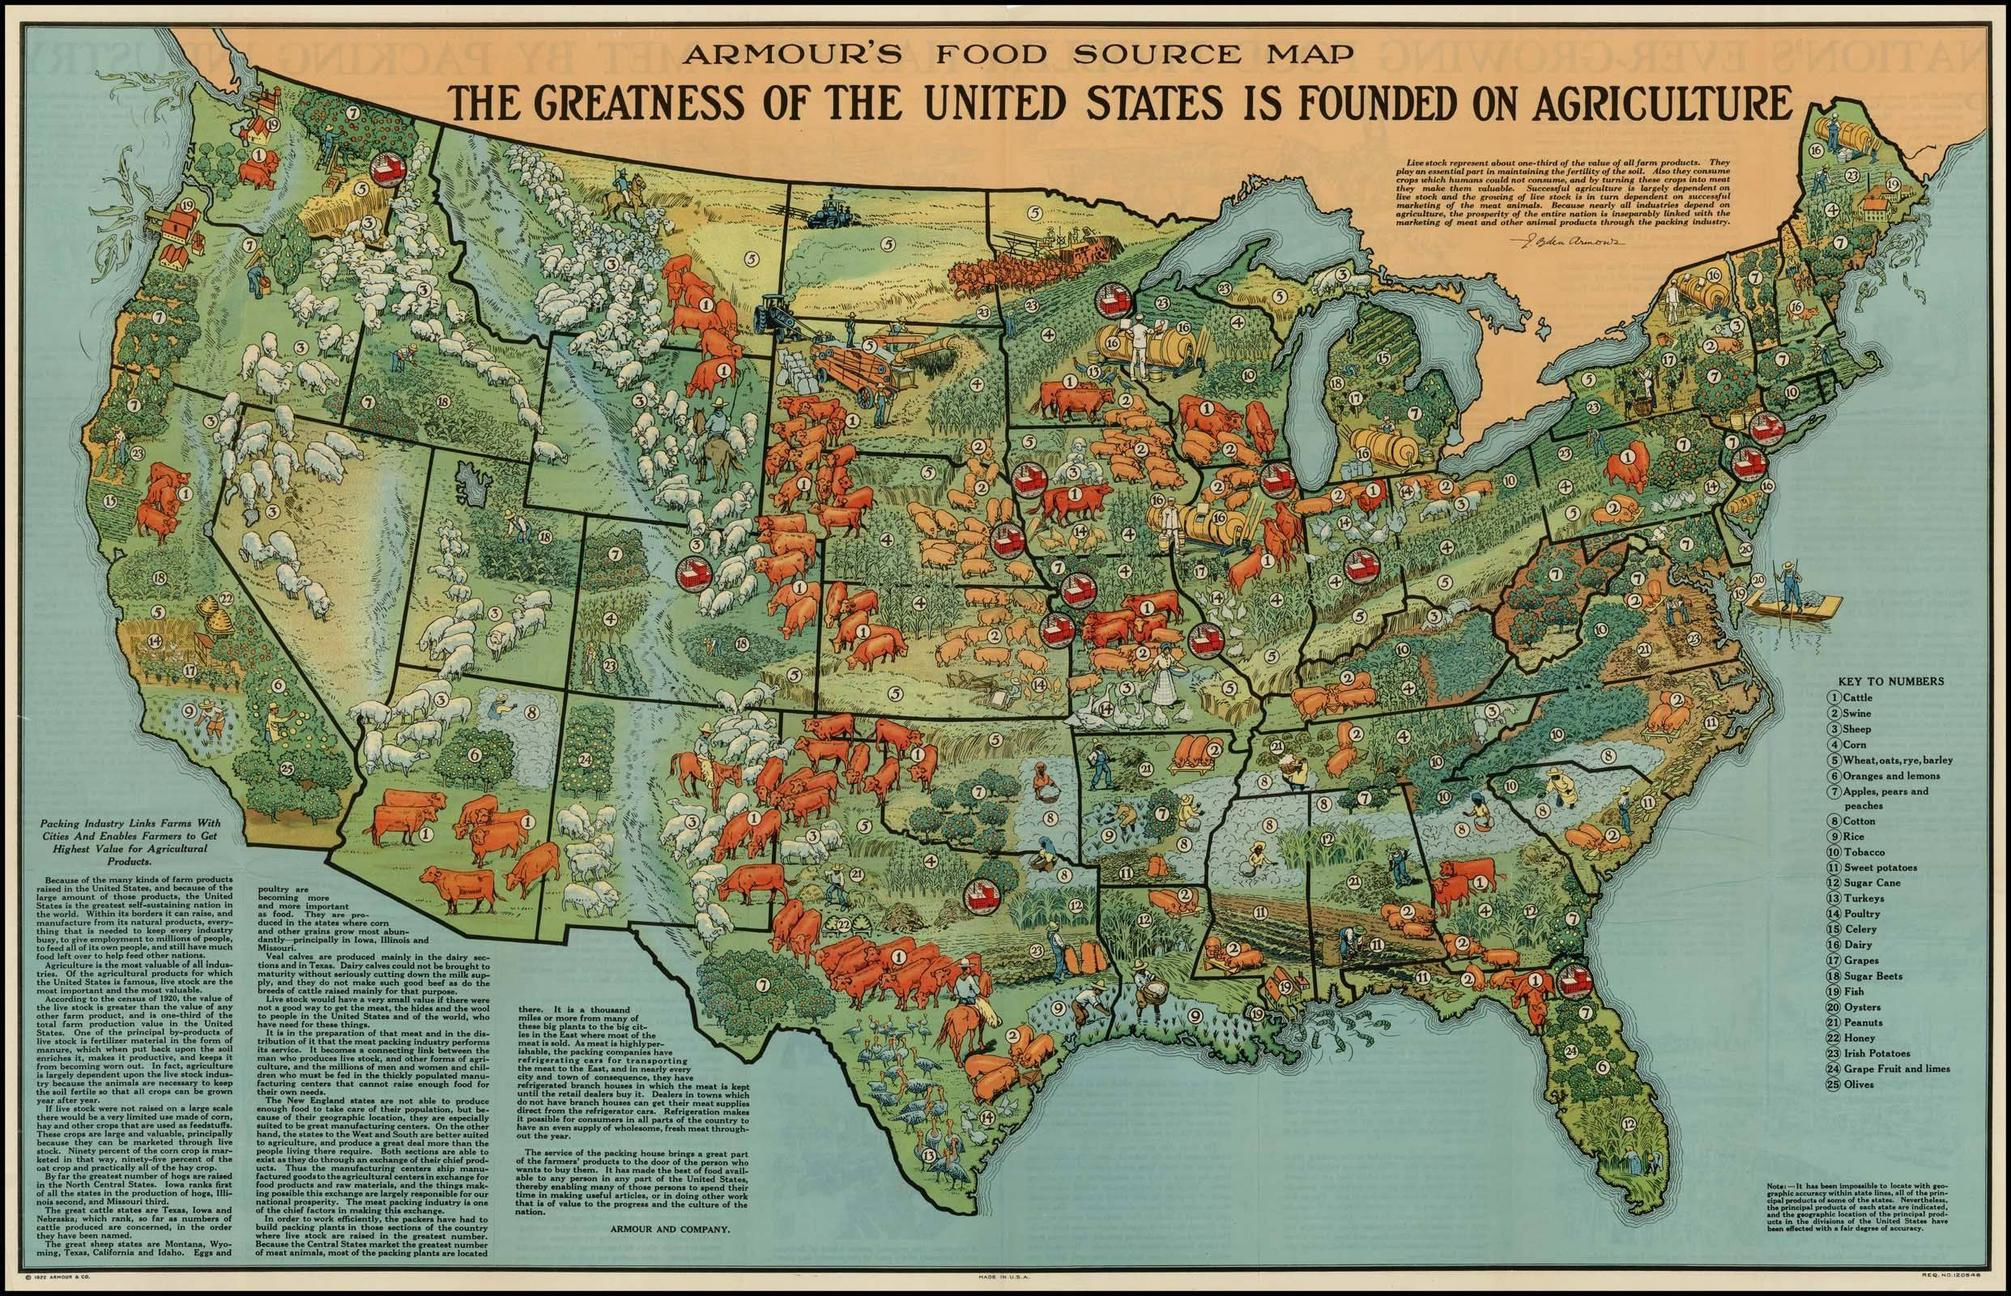 40 Maps That Explain Food In America | Vox - Texas Wheat Production Map